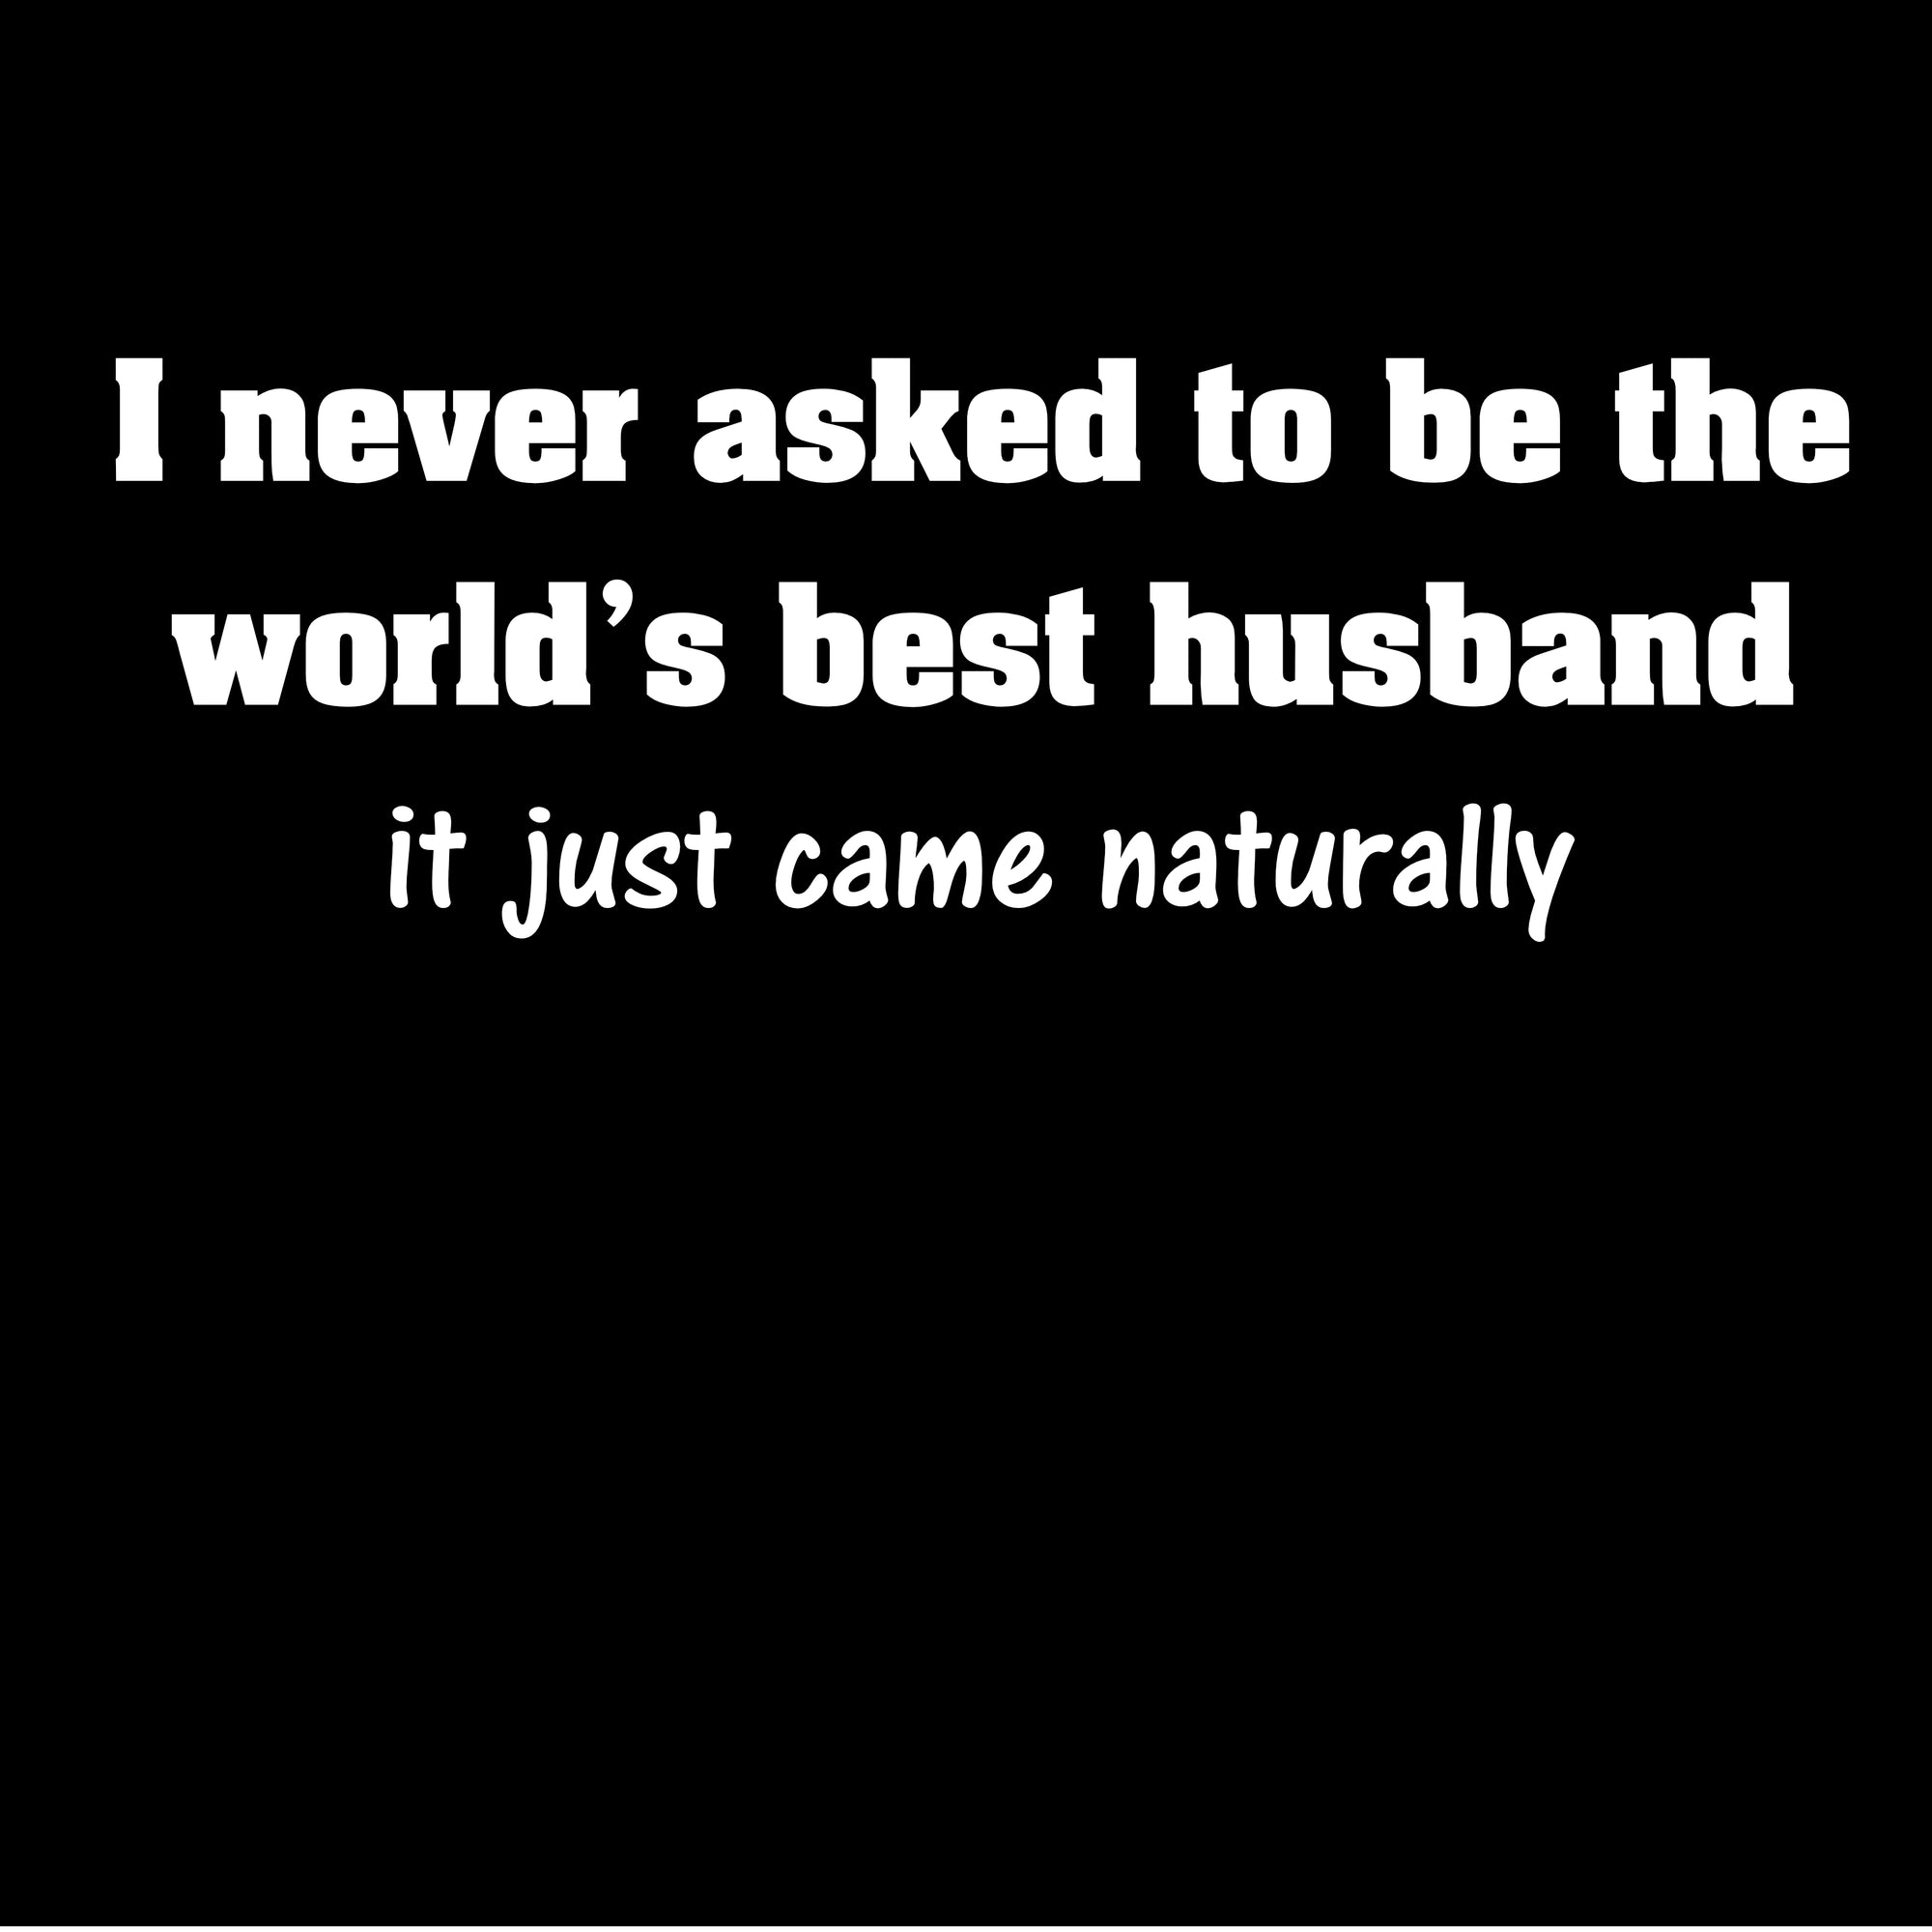 I Never Asked to be the World's Best Husband Printed T-Shirt-Navy